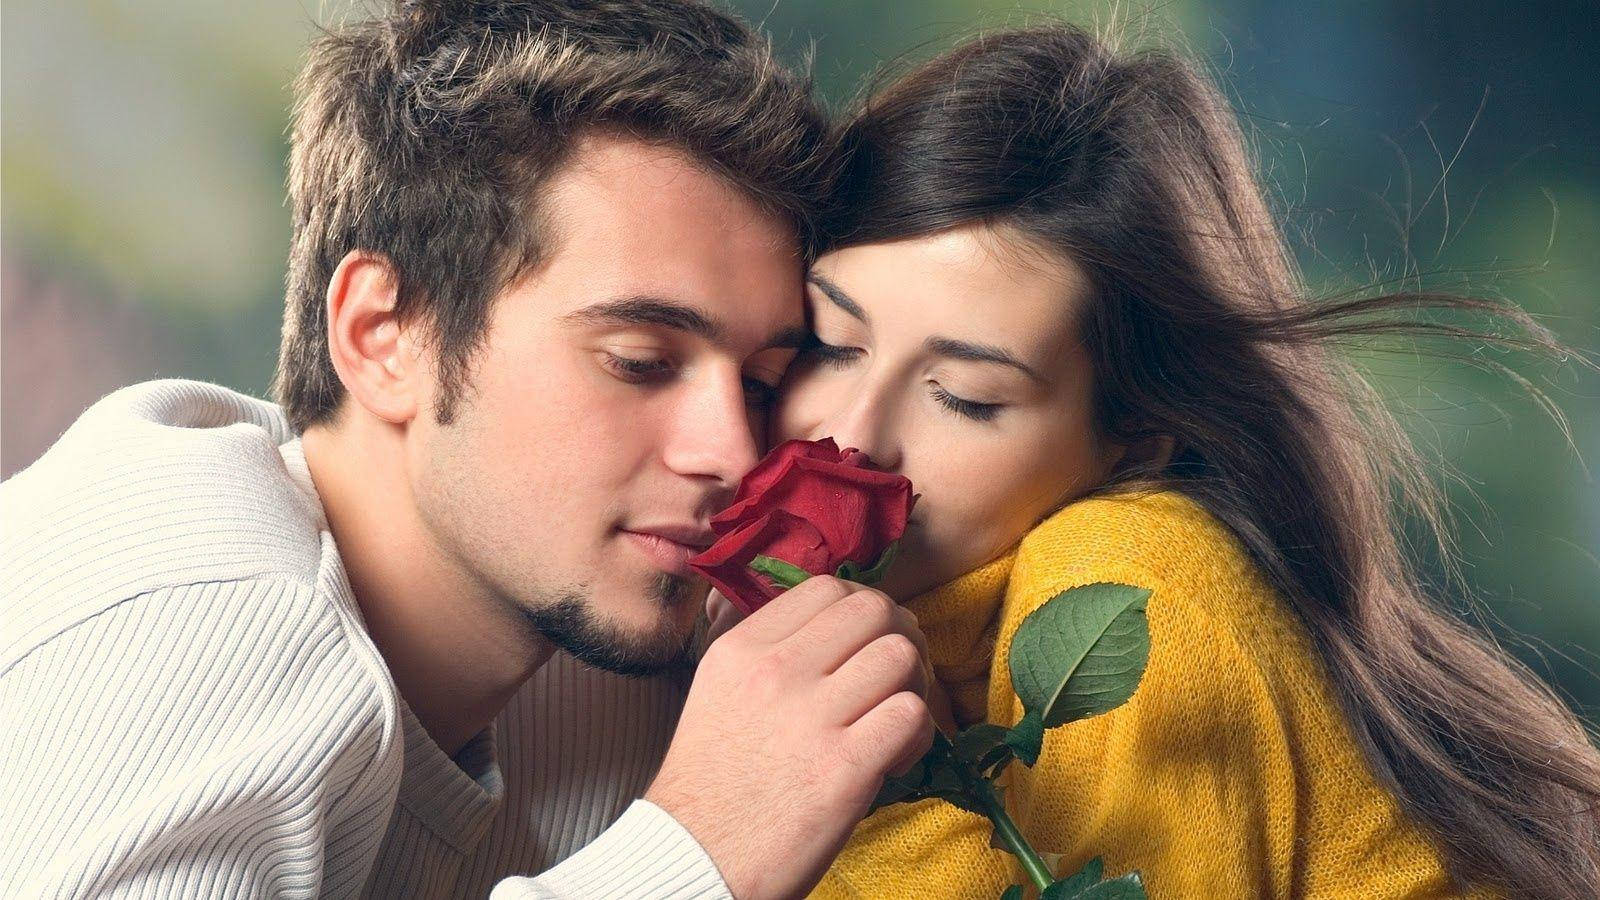 Romantic Couples Smelling A Rose